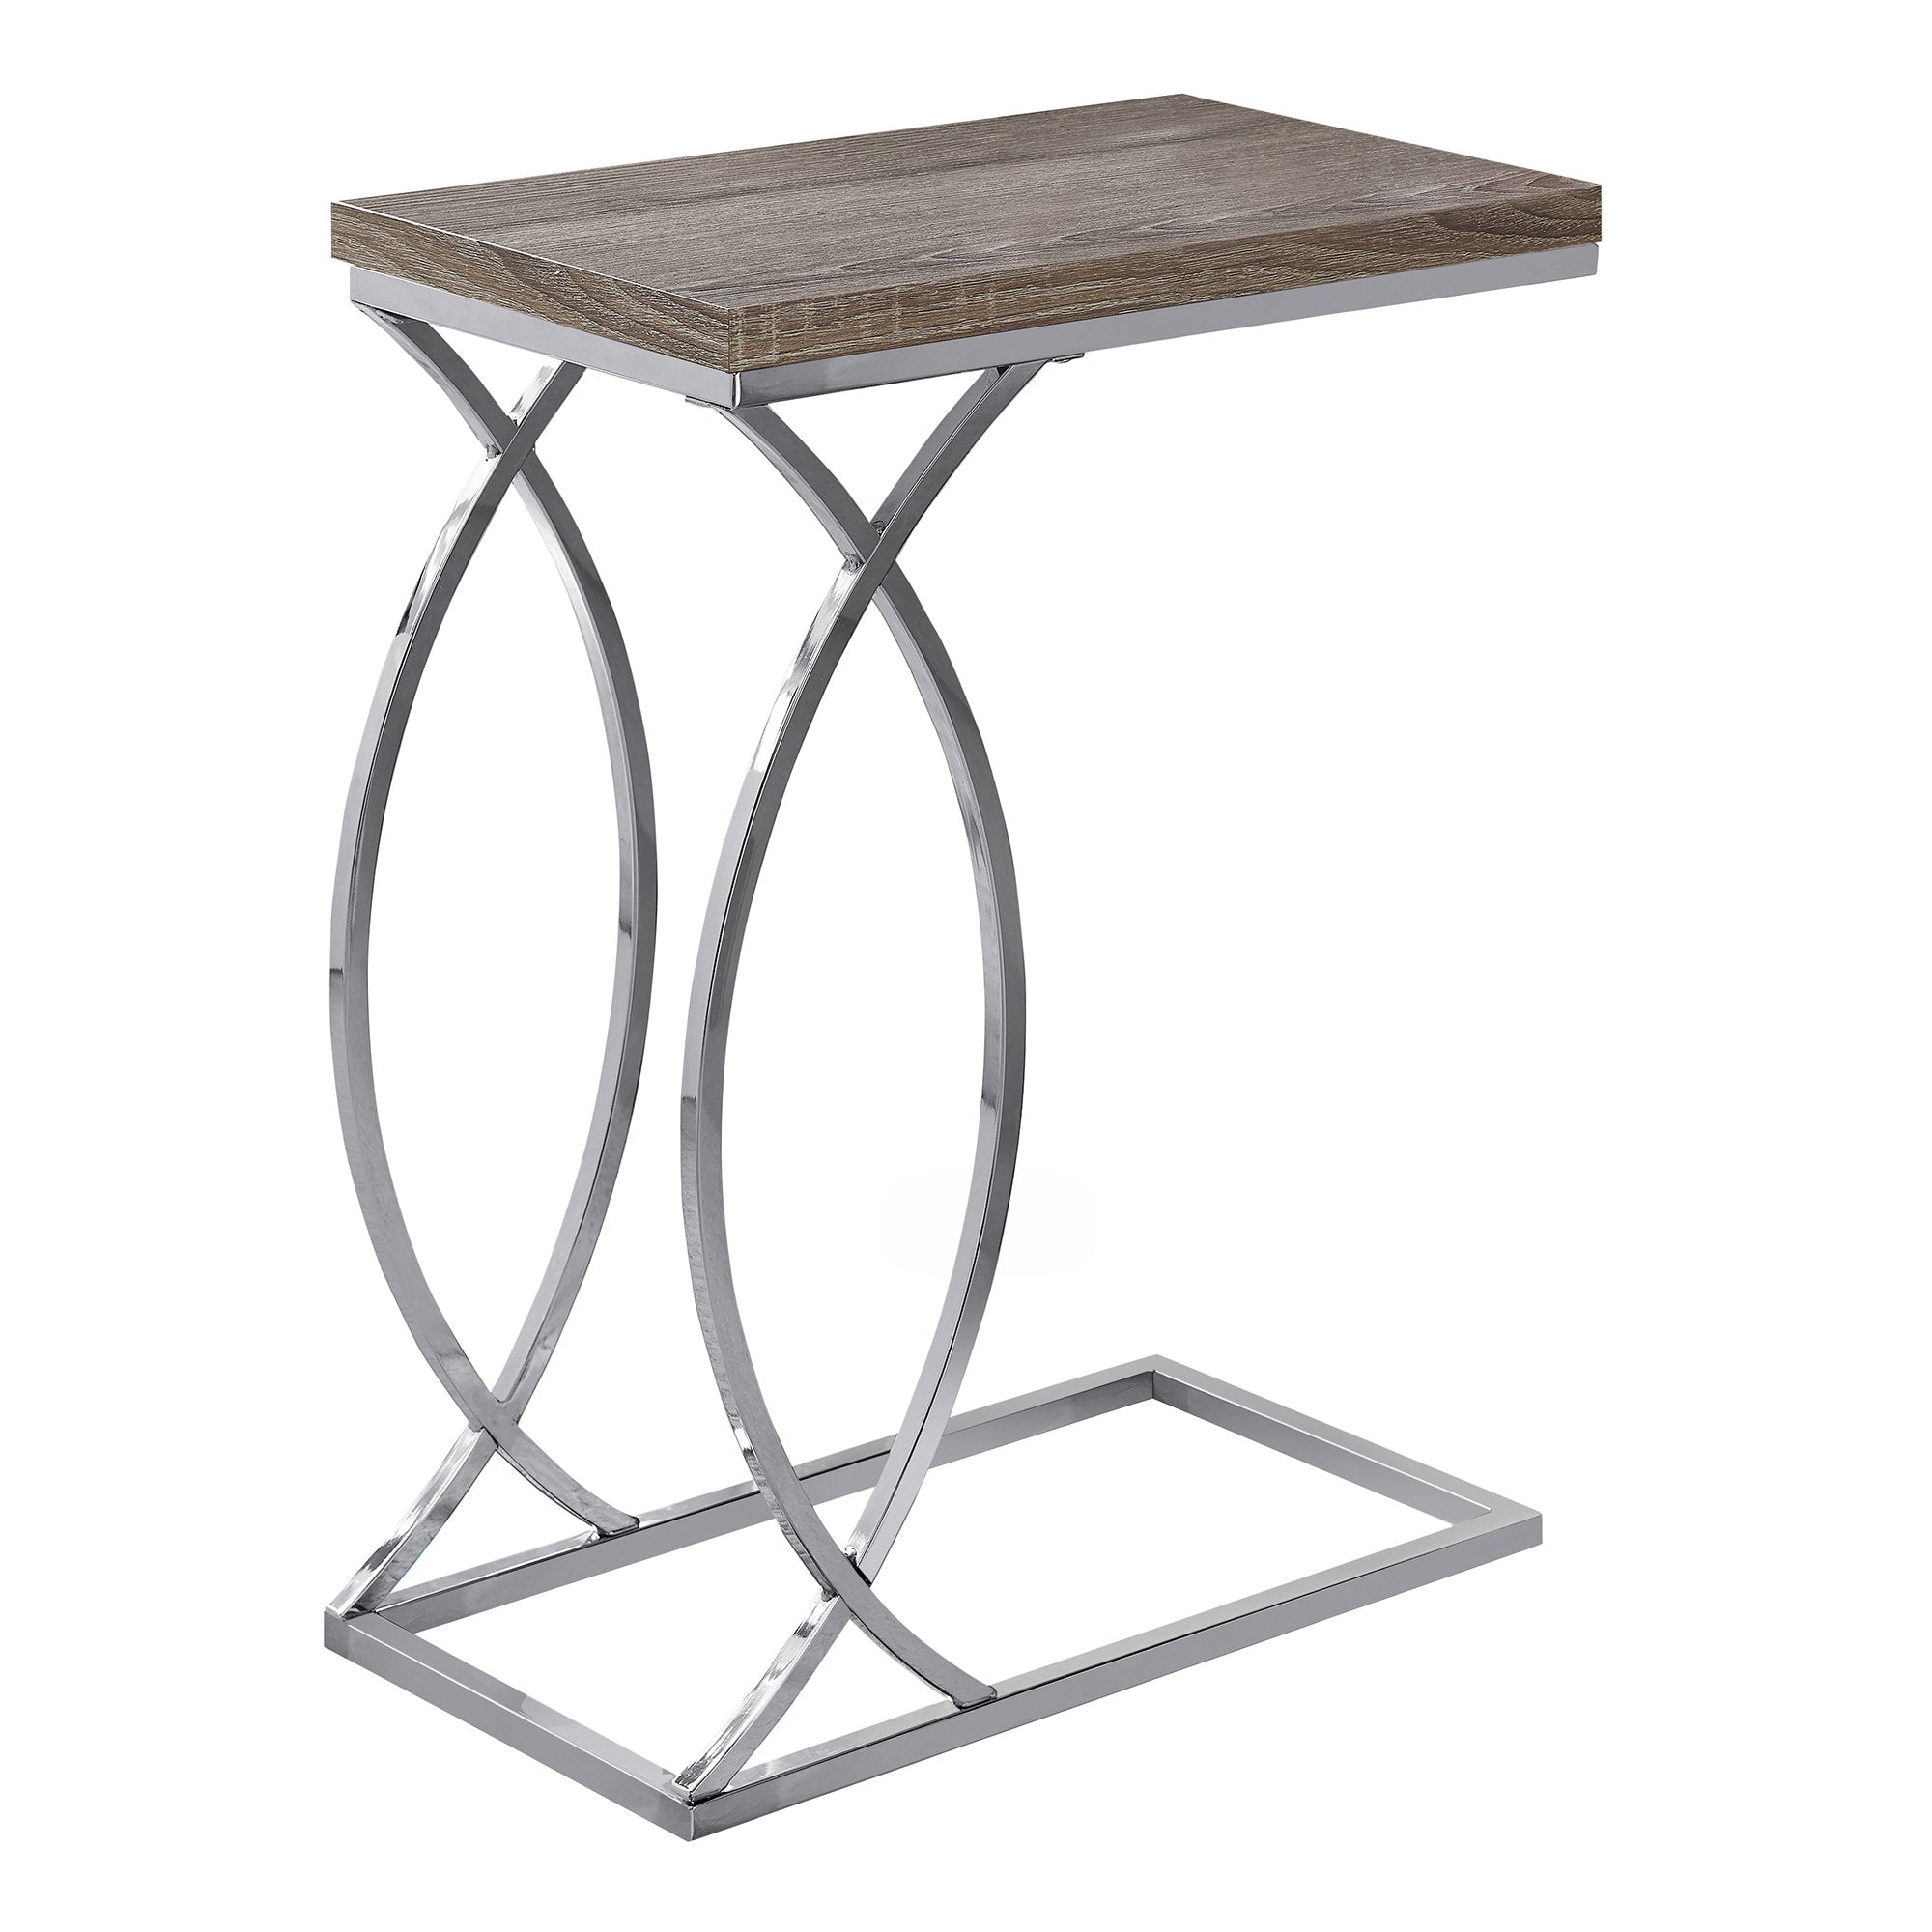 MN-623186    Accent Table, C-Shaped, End, Side, Snack, Living Room, Bedroom, Metal Legs, Laminate, Dark Taupe, Chrome, Contemporary, Modern